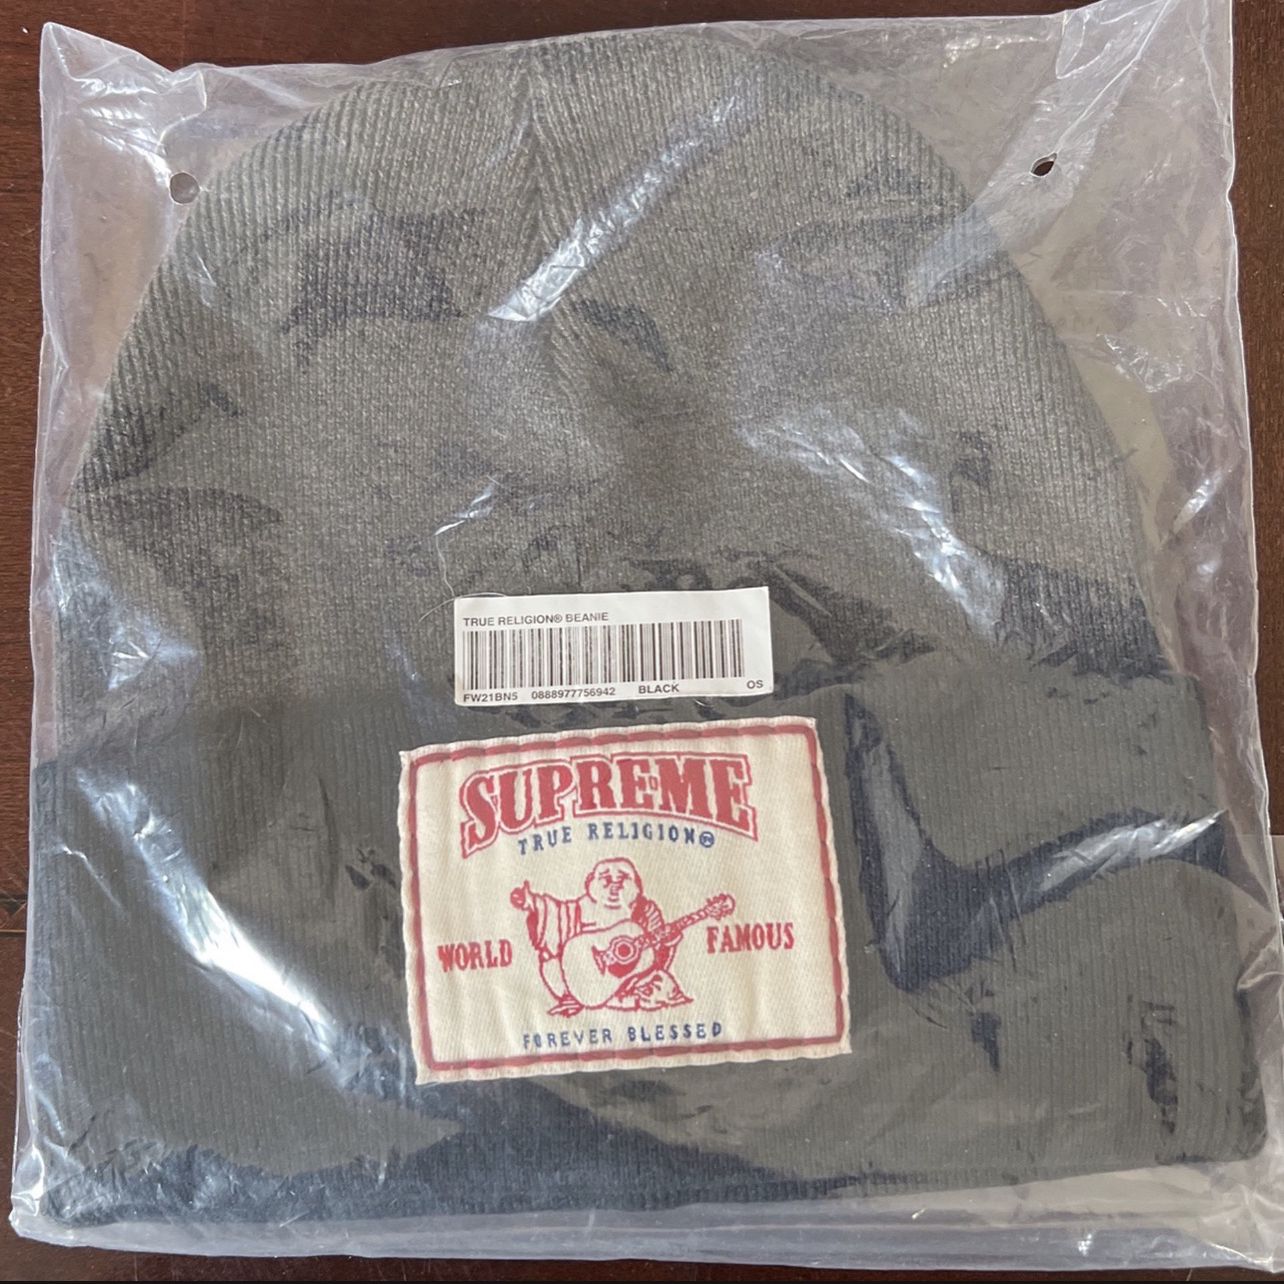 SUPREME MYSTERY BOX for Sale in Rancho Cucamonga, CA - OfferUp